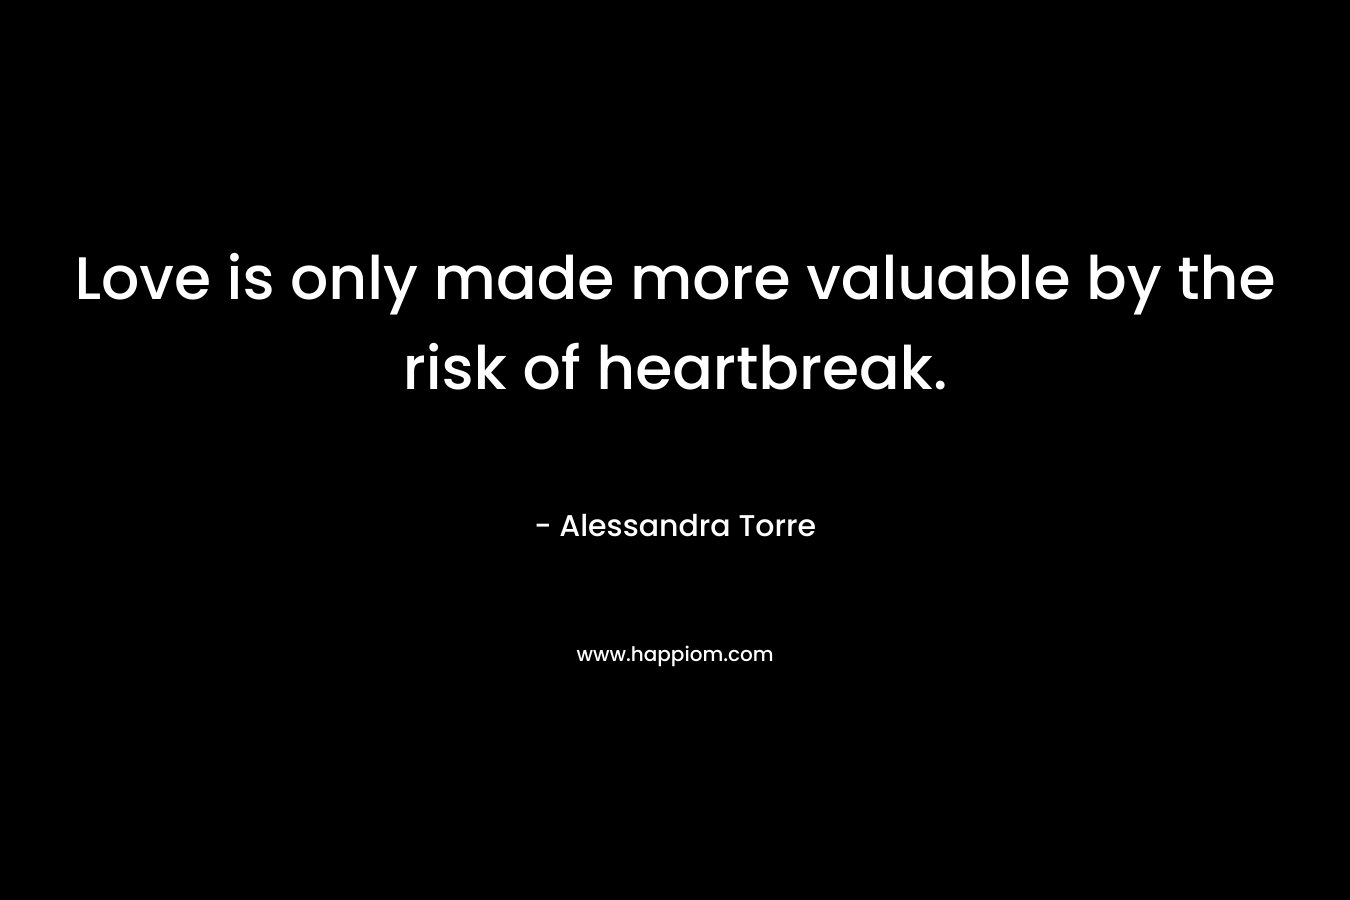 Love is only made more valuable by the risk of heartbreak. – Alessandra Torre